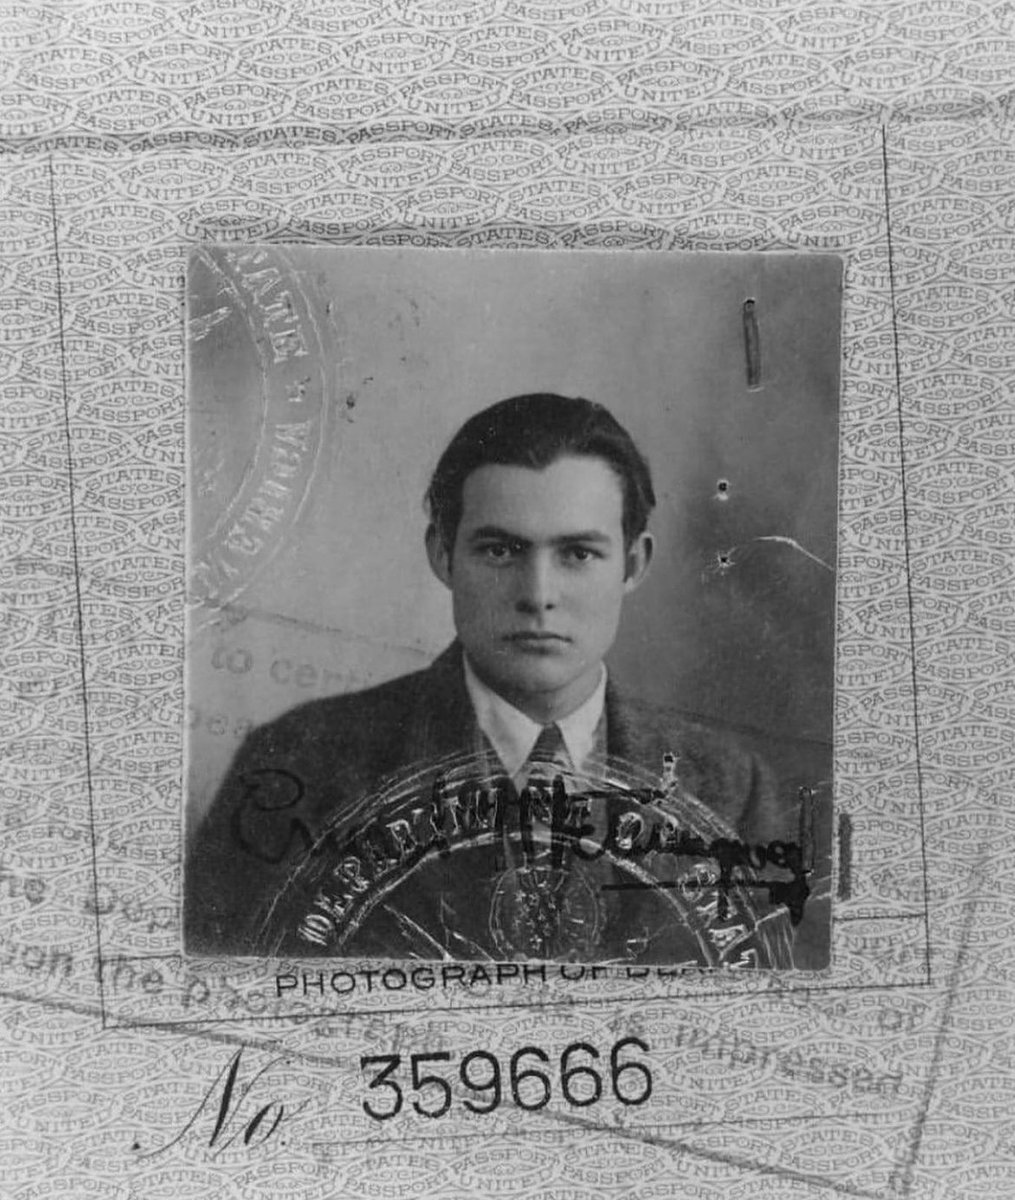 Ernest Hemingway in a United States passport photograph, 1923.